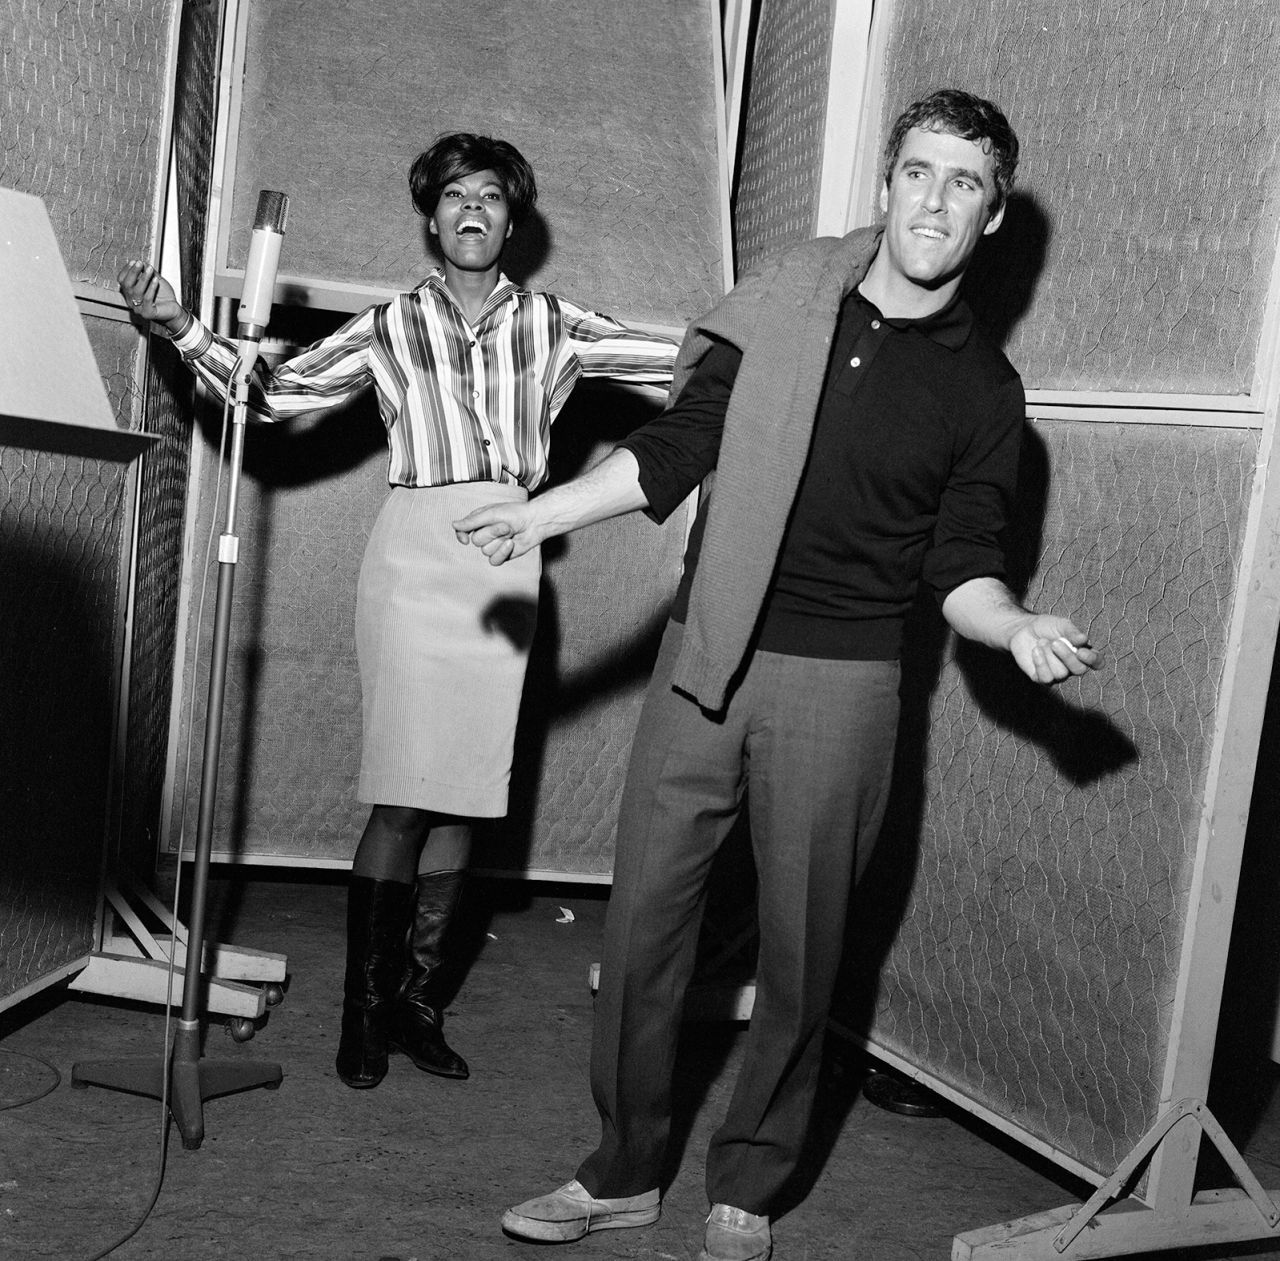 Warwick and songwriter Burt Bacharach record a song at Pye Studios in London in 1964. Warwick was discovered by Bacharach and fellow songwriter Hal David when she was 21. "Don't Make Me Over," Warwick's first Bacharach-penned hit song, was released in 1962.